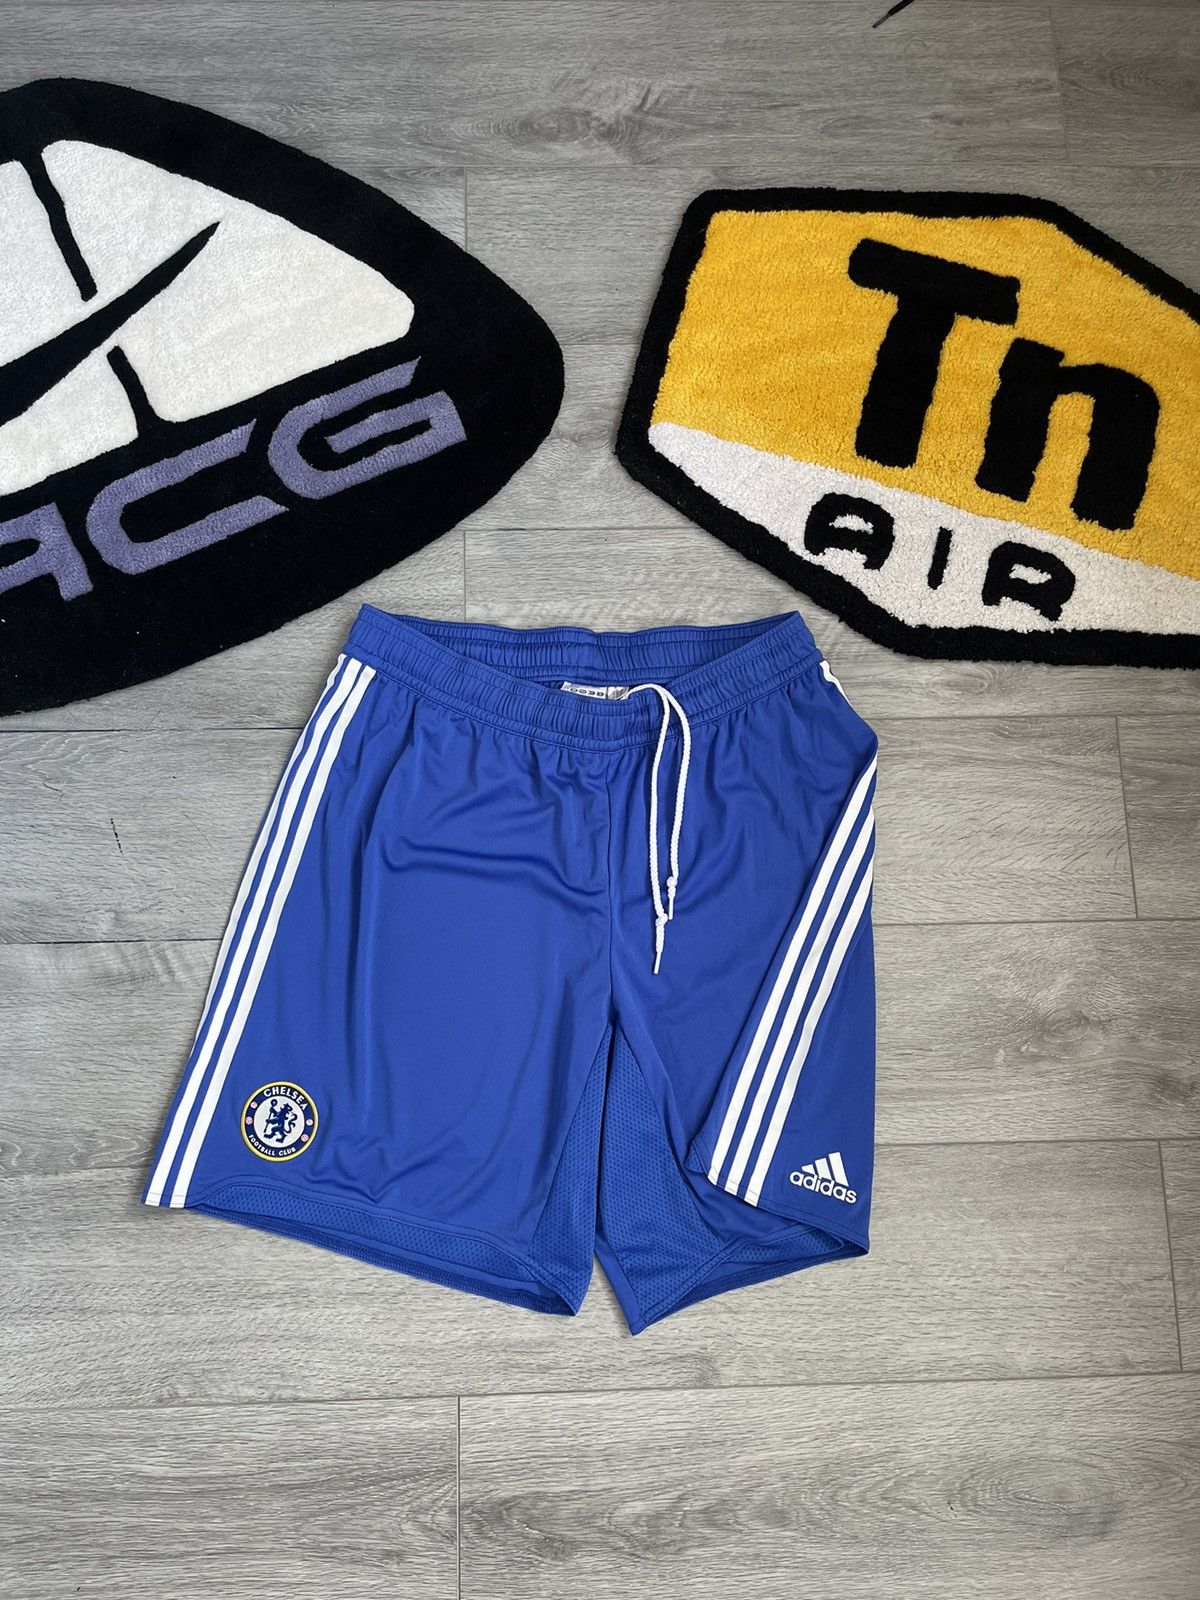 Pre-owned Adidas X Chelsea Soccer Adidas Chelsea 2009 Football Shorts Size Xxl In Blue